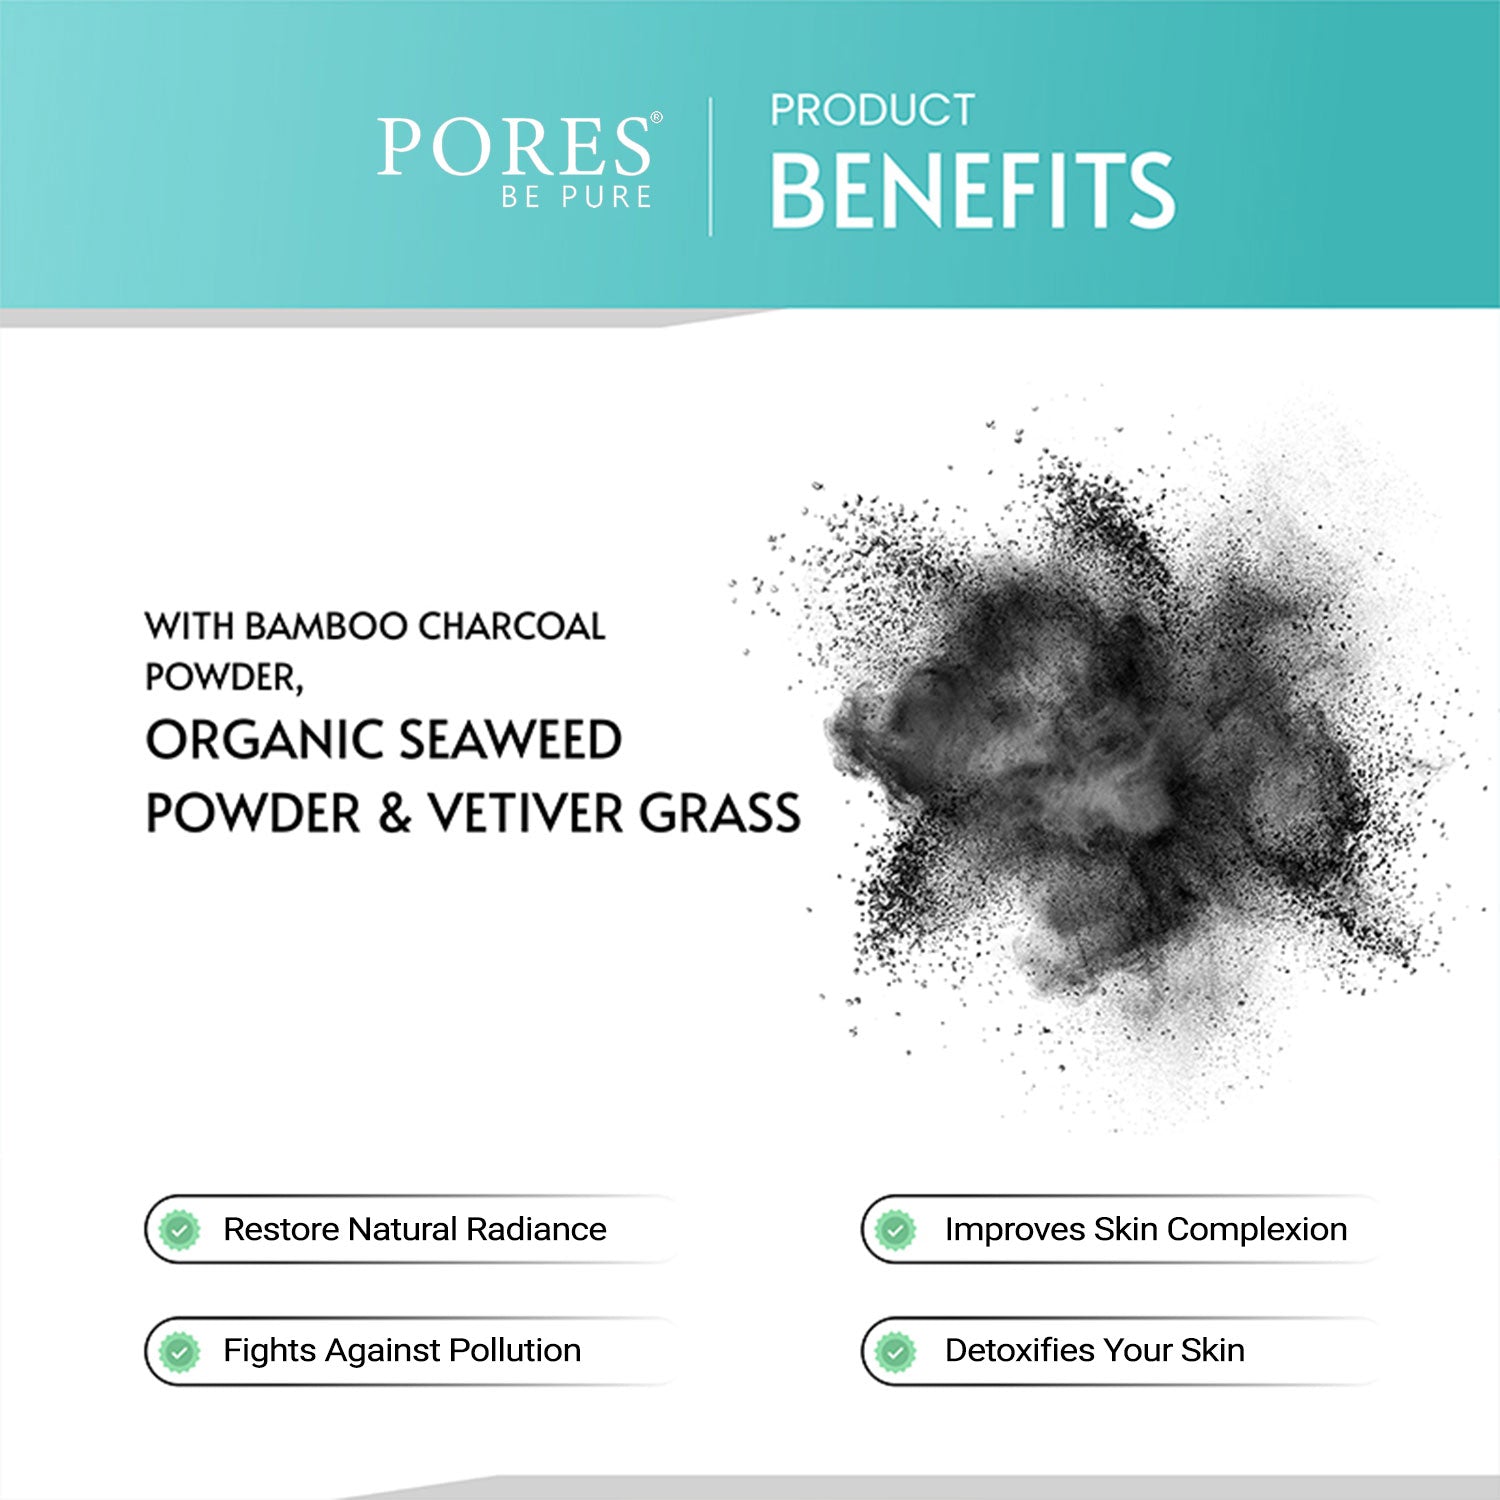 Charcoal, Seaweed powder and Vetiver grass benefits with PORES BE PURE